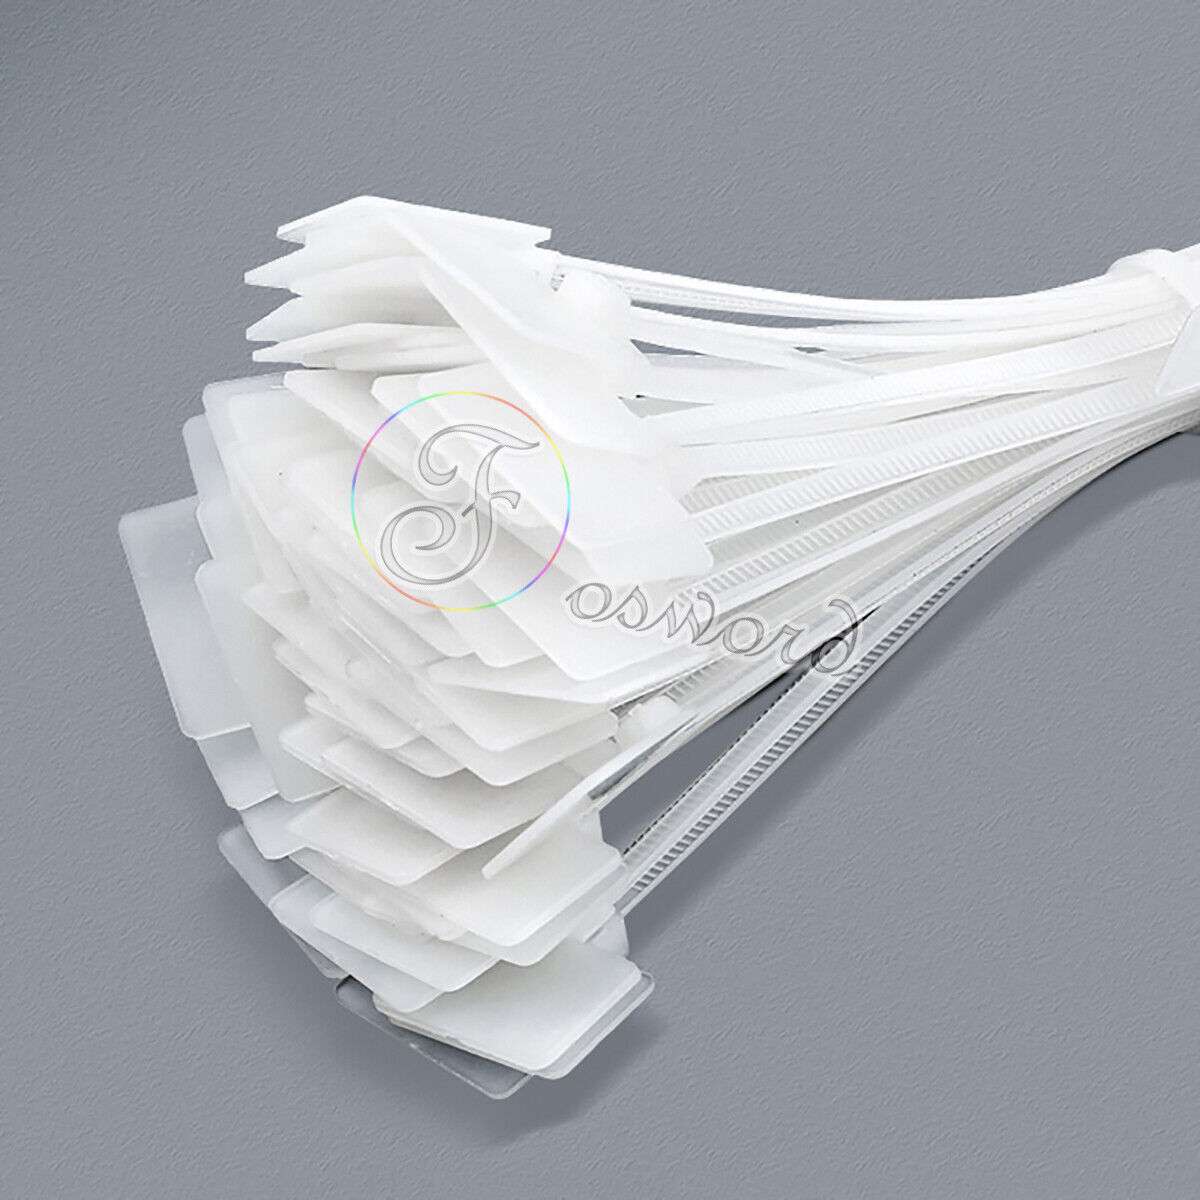 Nylon Plastic Label Cable Ties Zip Tie Wraps Tags Marker 3 4 mm x 100 150 200mm